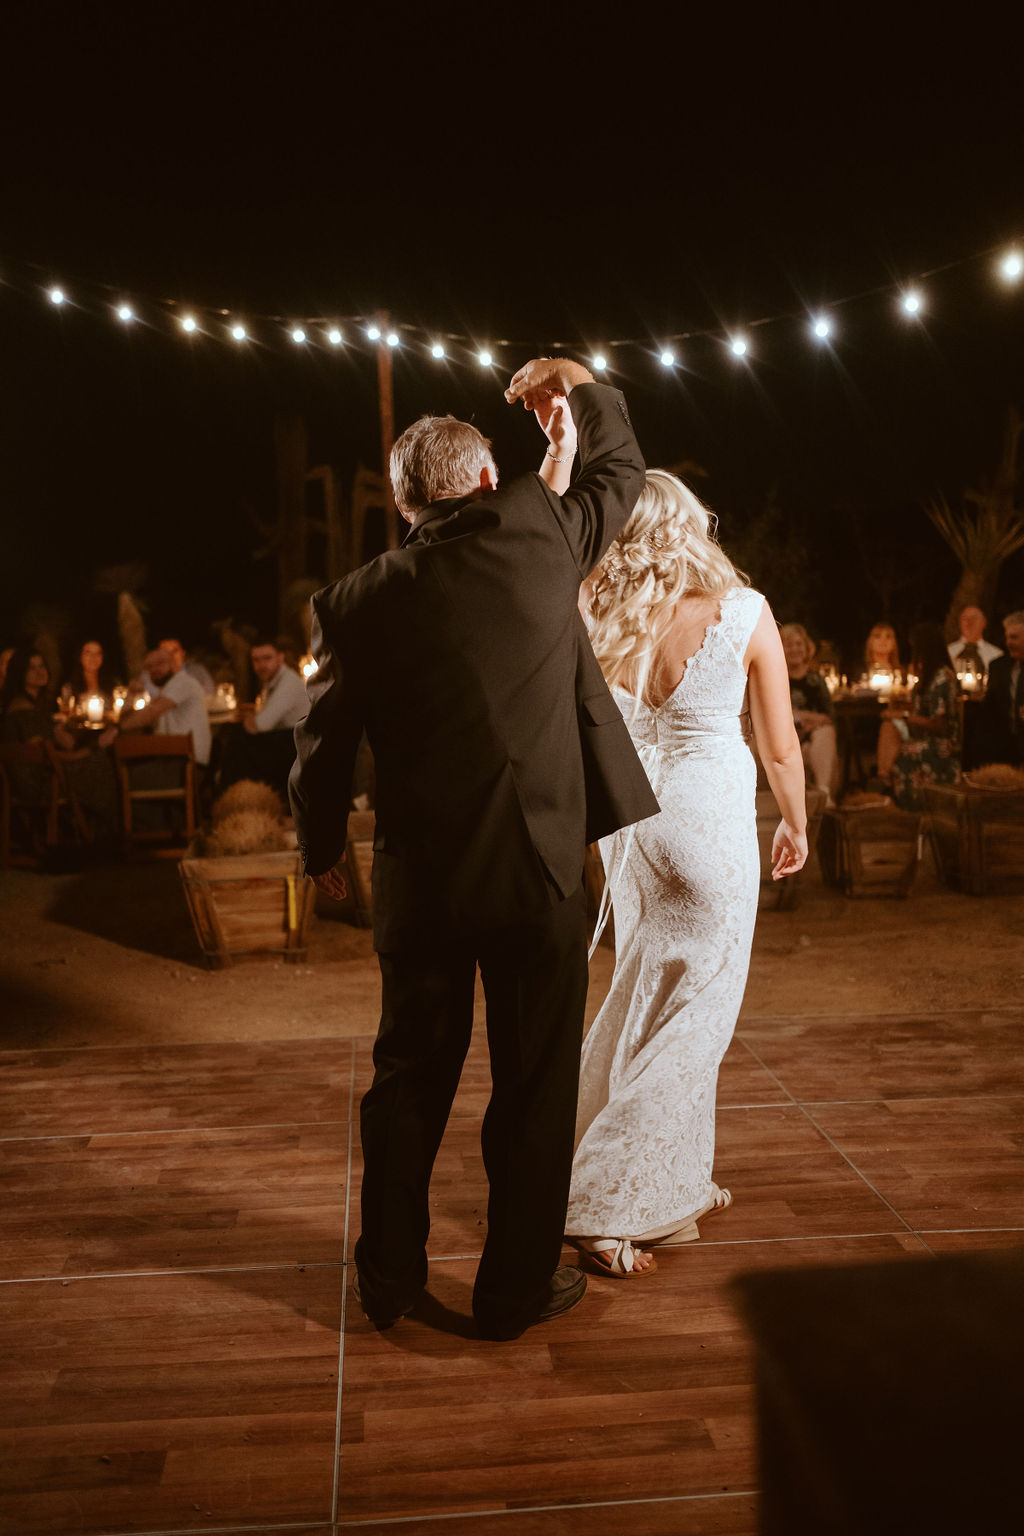 Father-Daughter Dance during Wedding Reception 